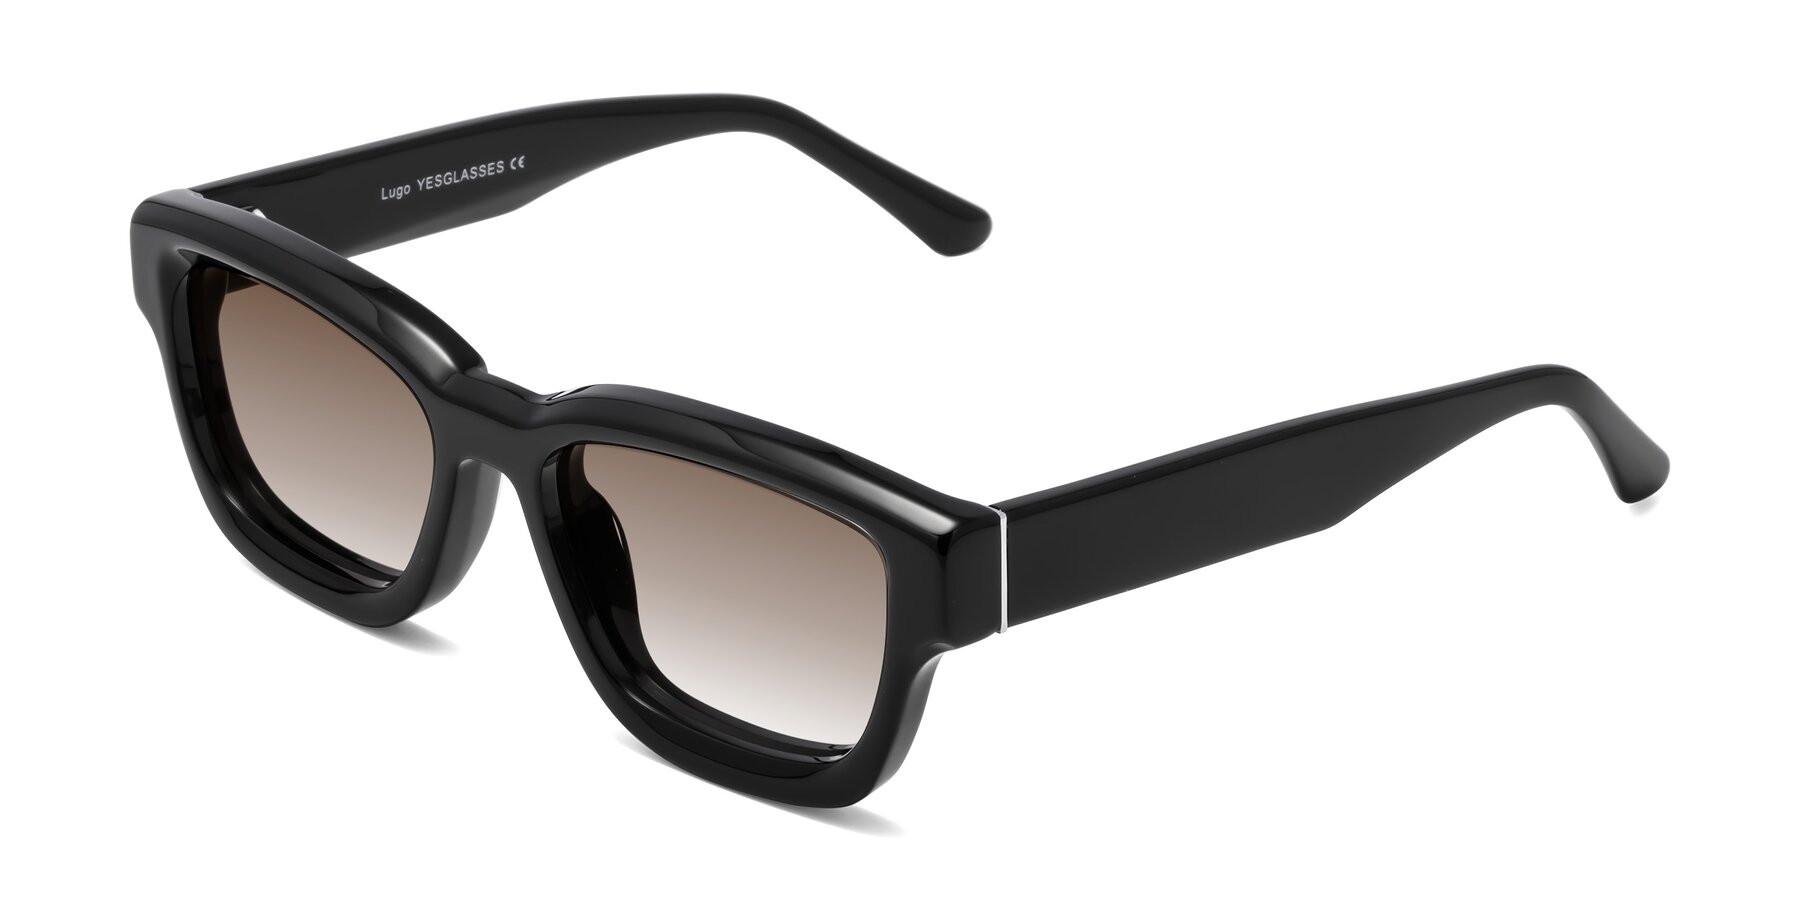 Angle of Lugo in Black with Brown Gradient Lenses